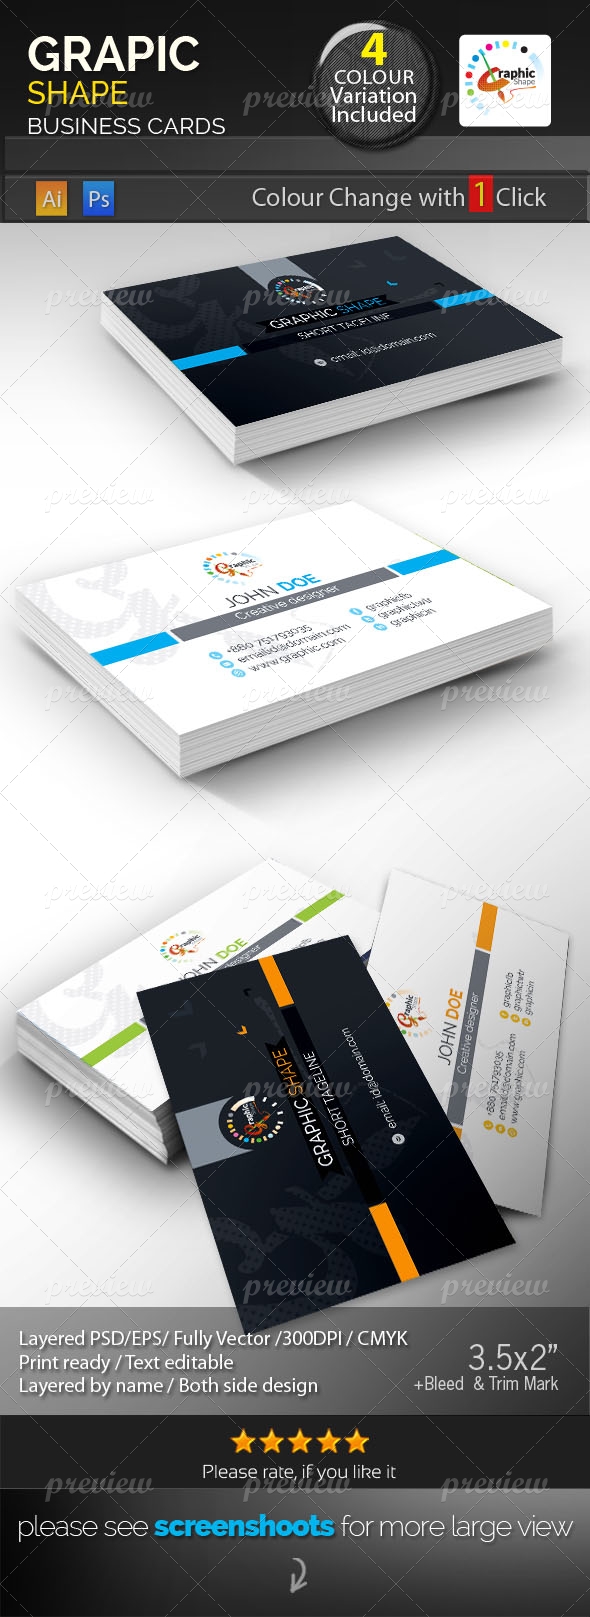 Graphic Shape Corporate Business Cards